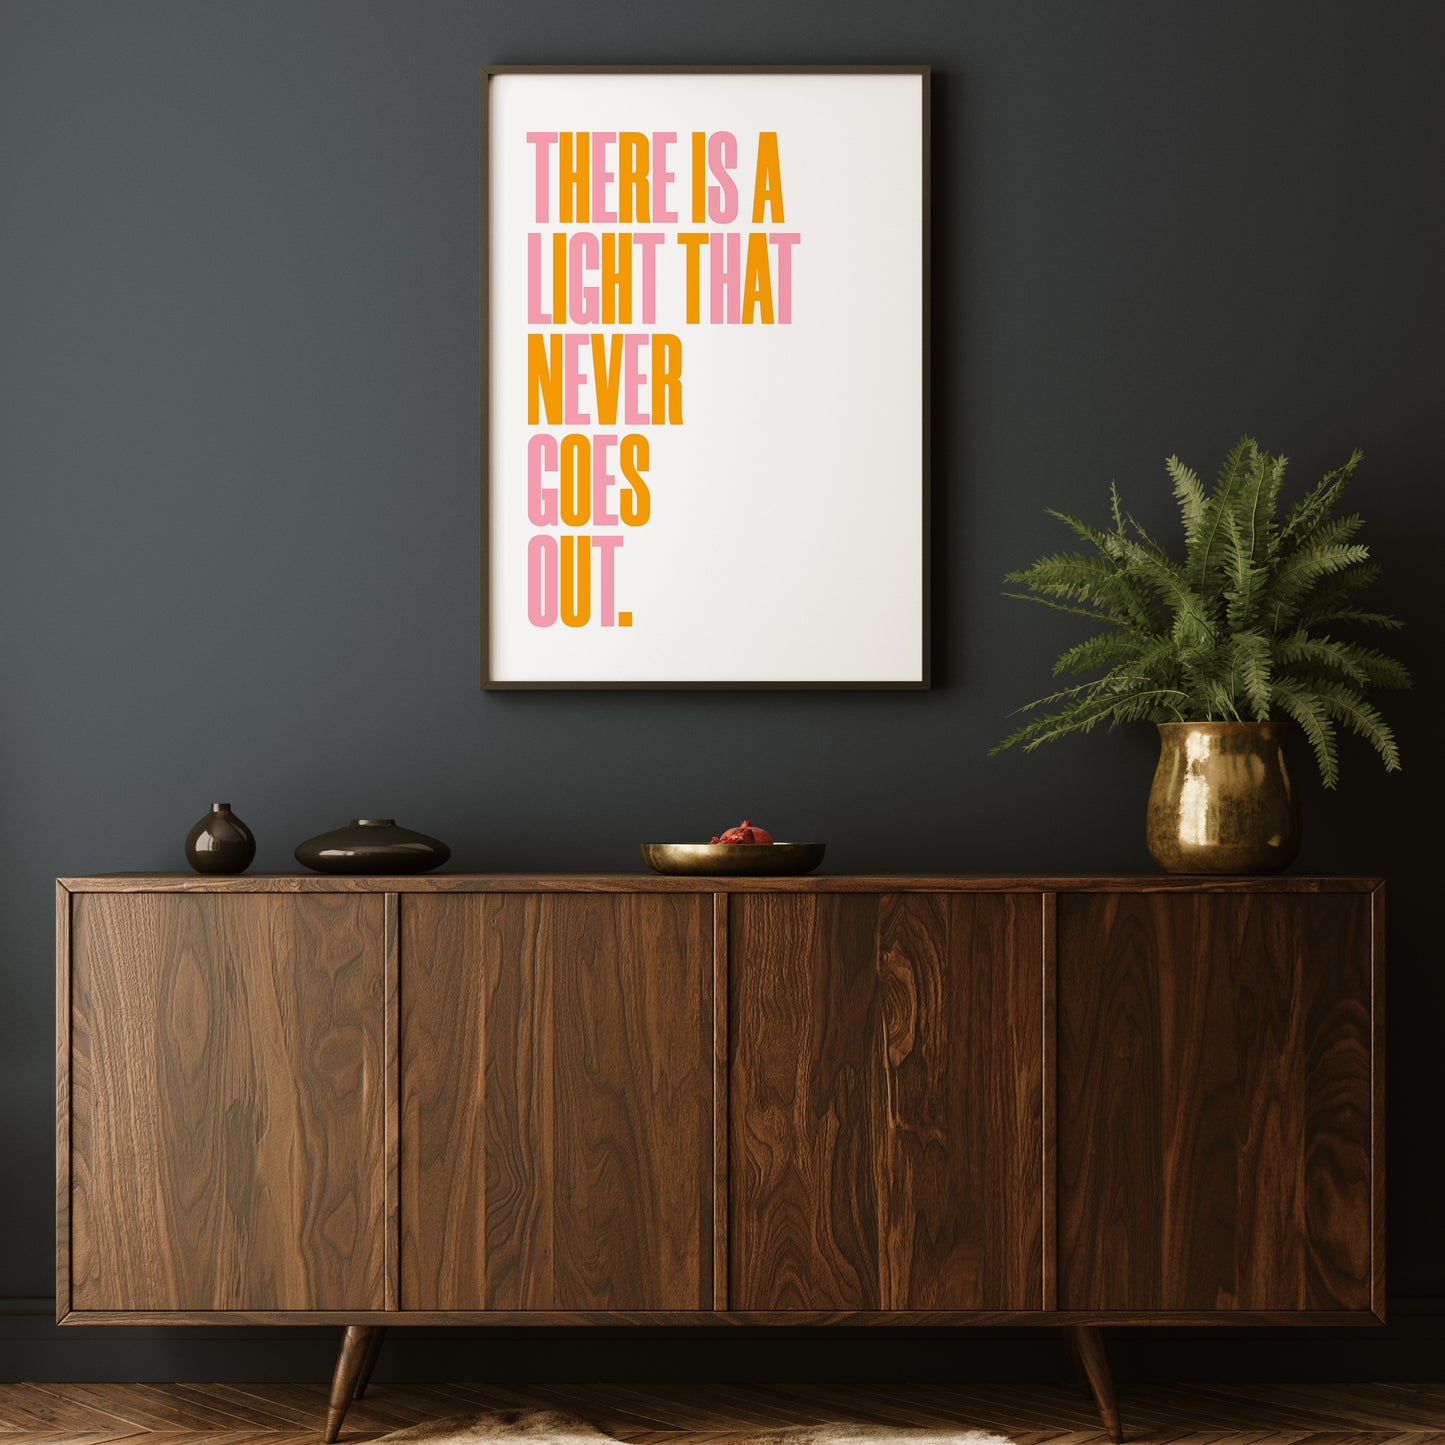 THERE IS A LIGHT THAT NEVE GOES OUT PRINT